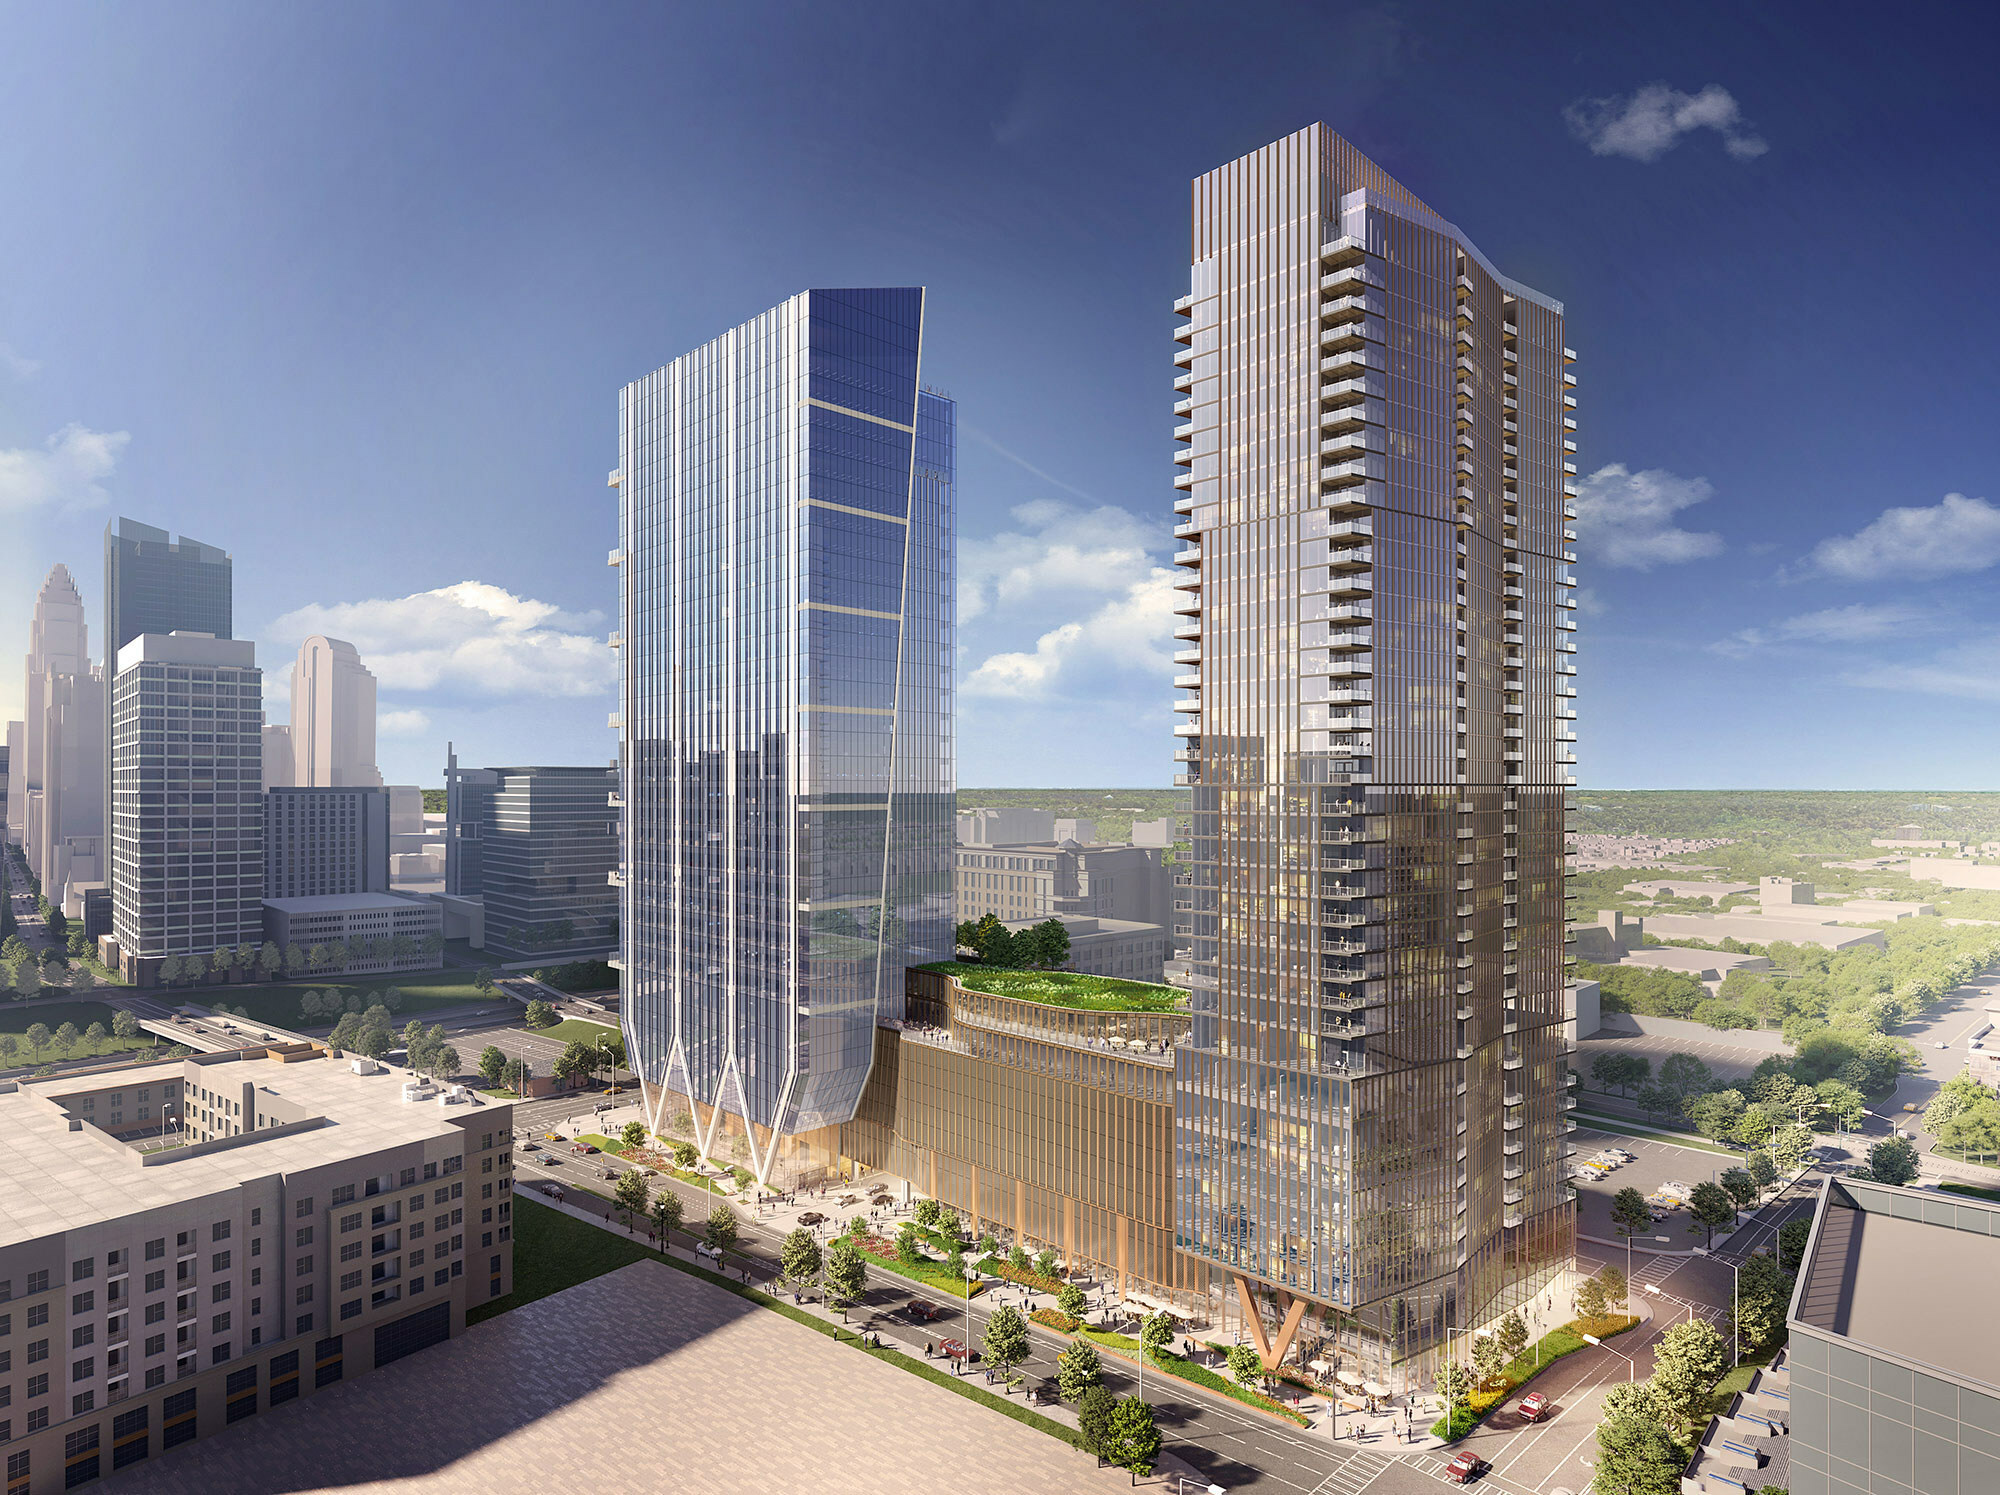 Clark Breaks Ground on Queensbridge Collective Development Featuring 409-Unit Multifamily Tower in Charlotte's South End